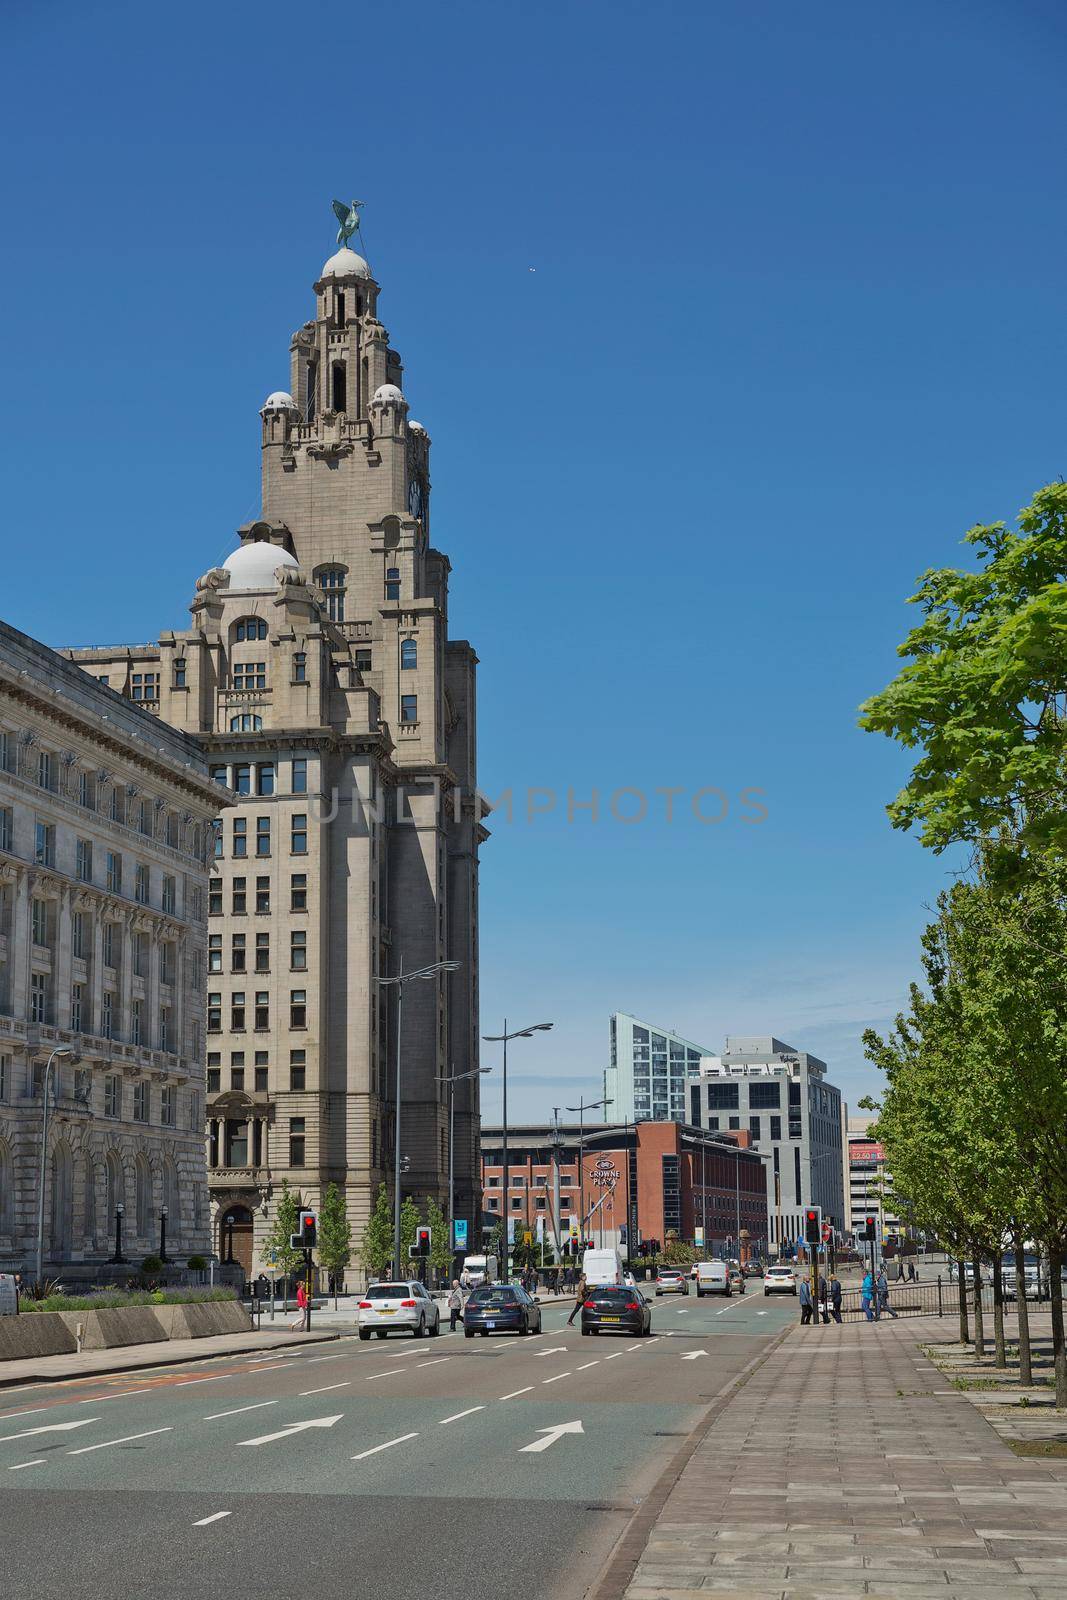 LIVERPOOL, ENGLAND, UK - JUNE 07, 2017: Architecture and traffic at the Strand street in Liverpool city, England